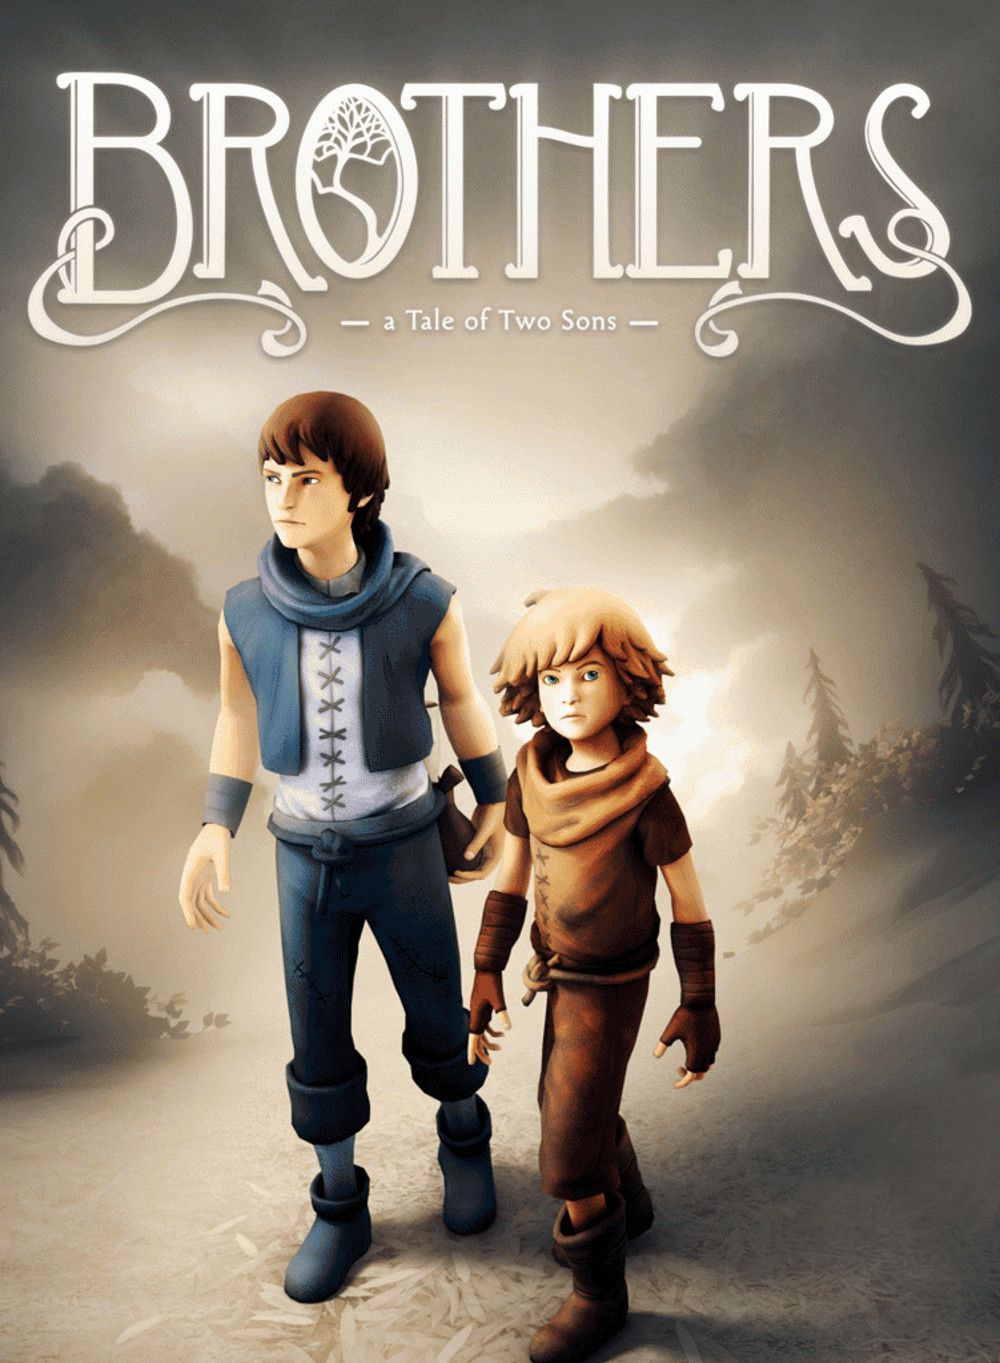 Brothers : A Tale of Two Sons (2013)  - Jeu vidéo streaming VF gratuit complet